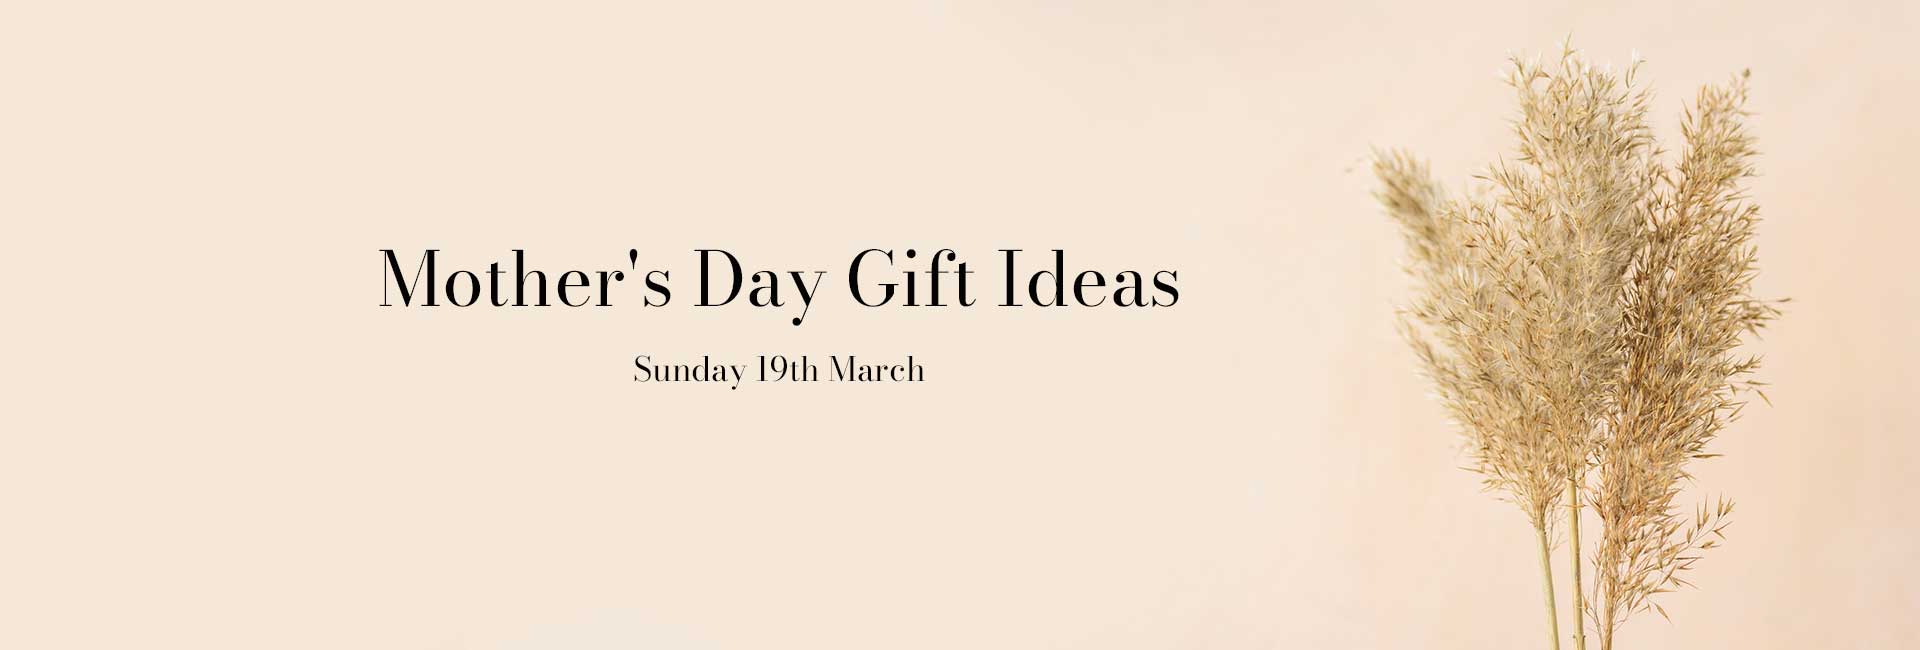 mothers day gift ideas south london salonsjpg